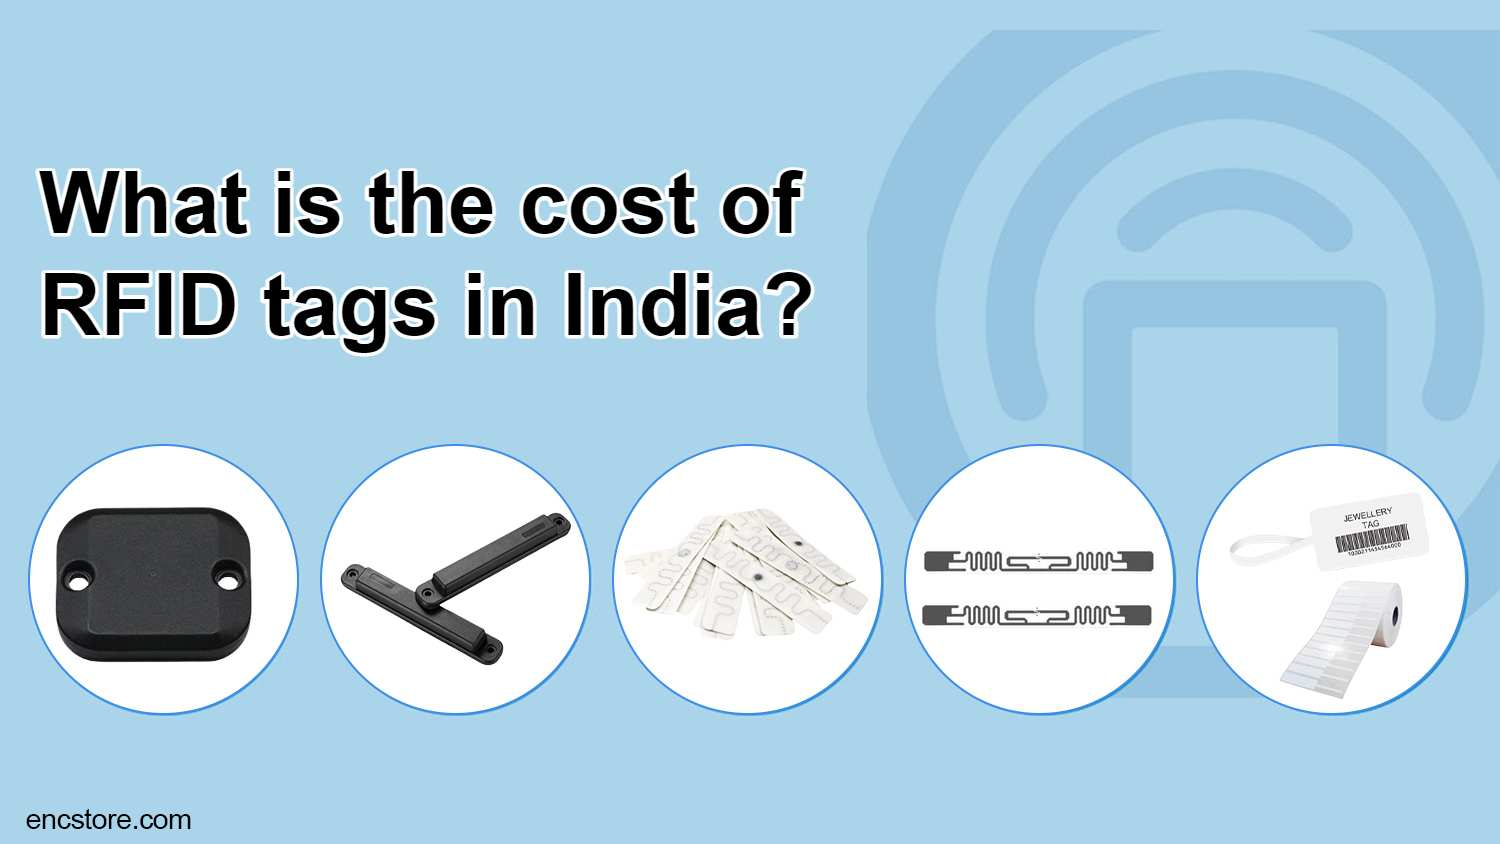 What is the cost of RFID tags in India?